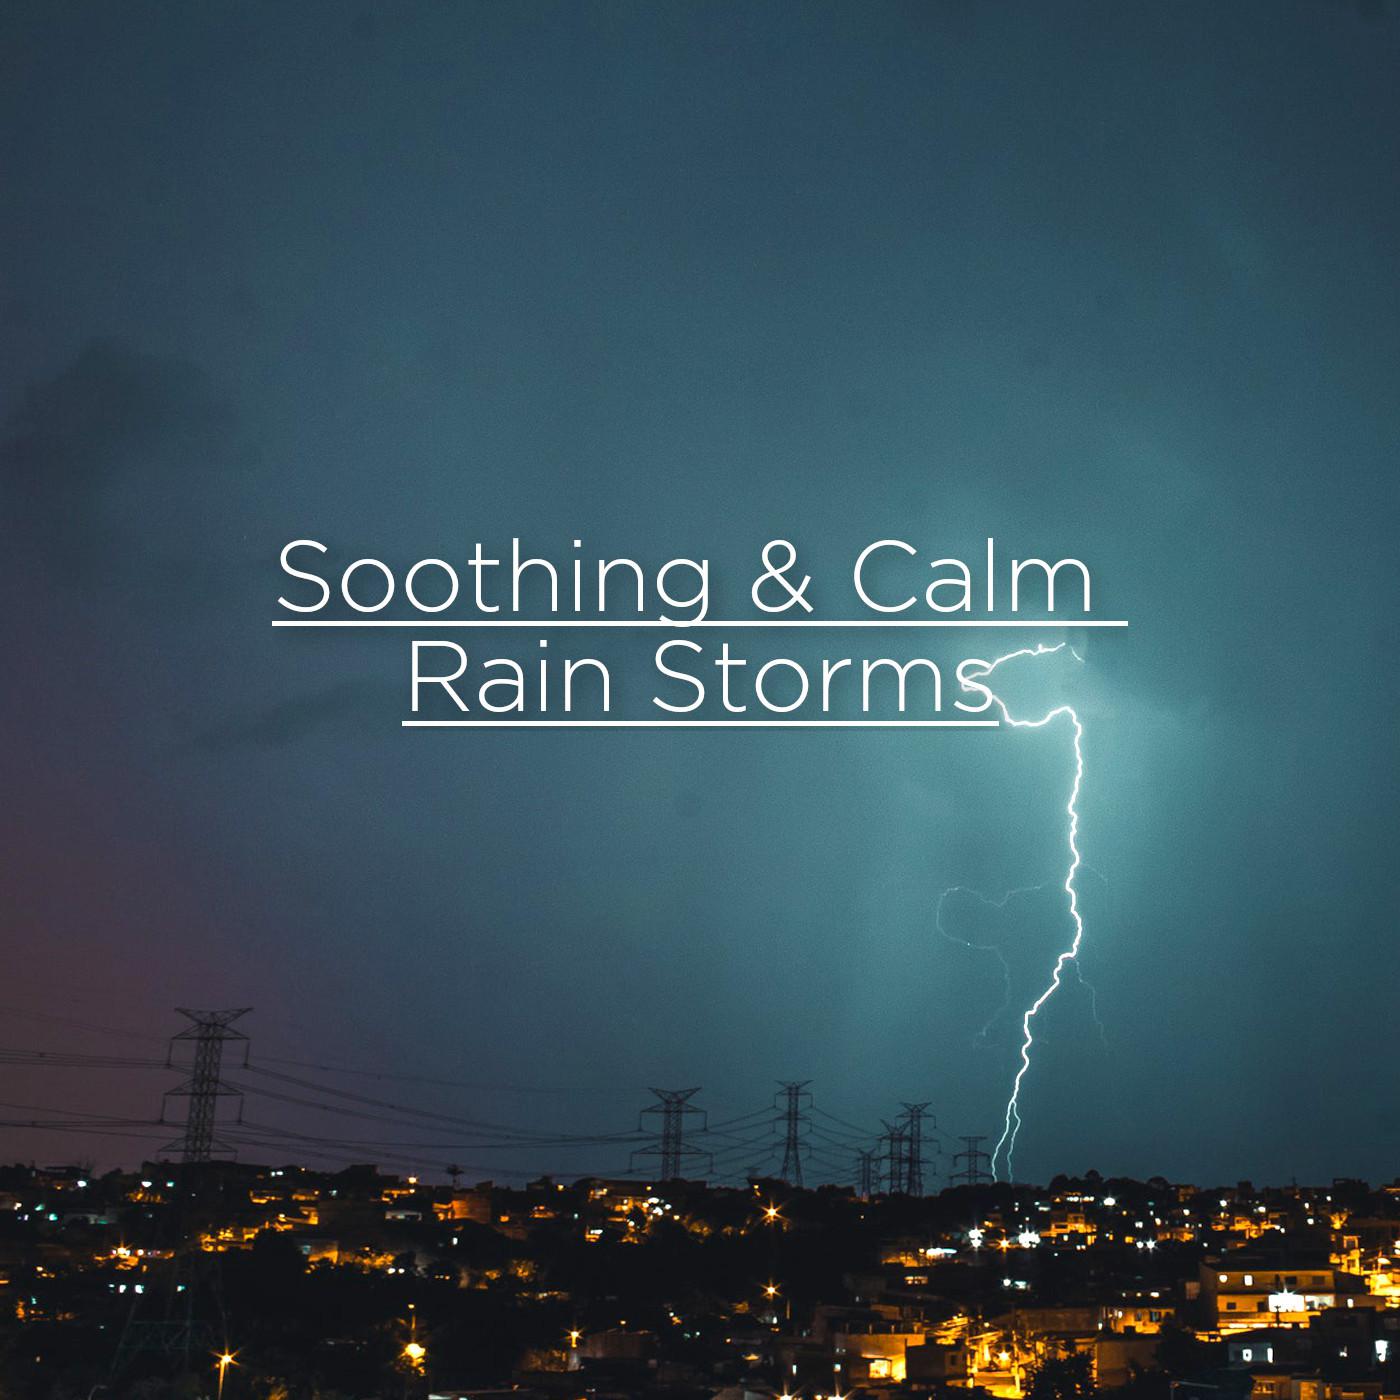 Soothing & Calm Rain Storms